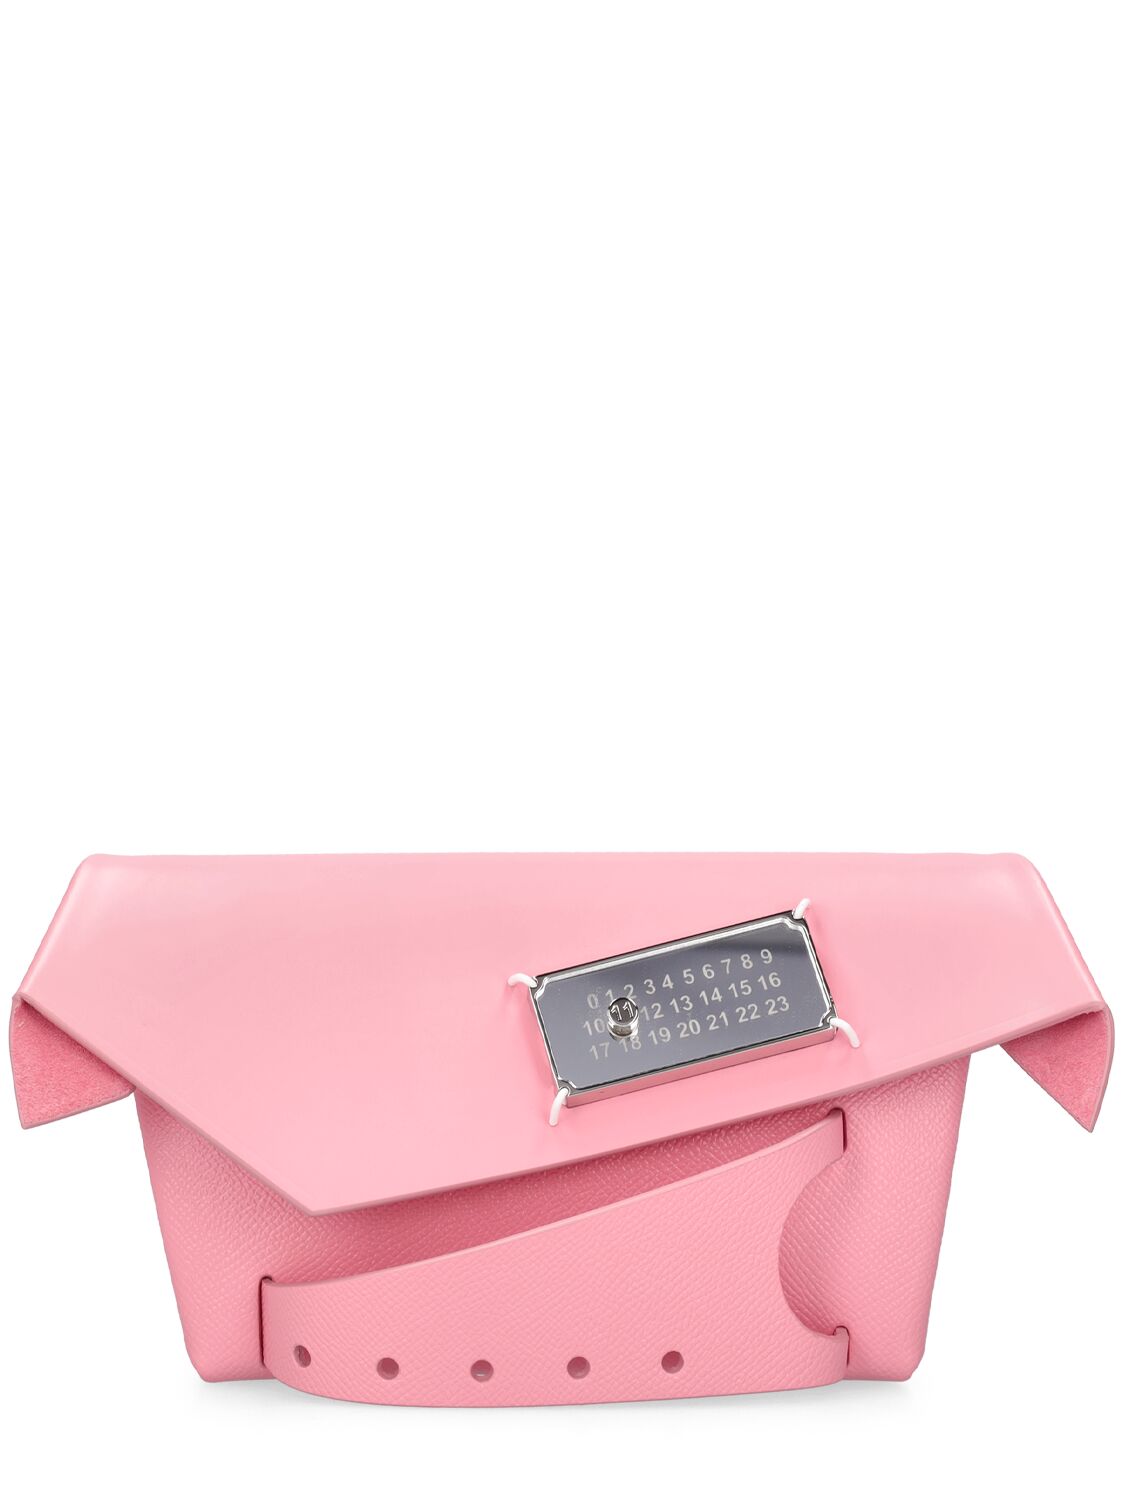 Maison Margiela Small Classique Snatched Leather Clutch In Peony